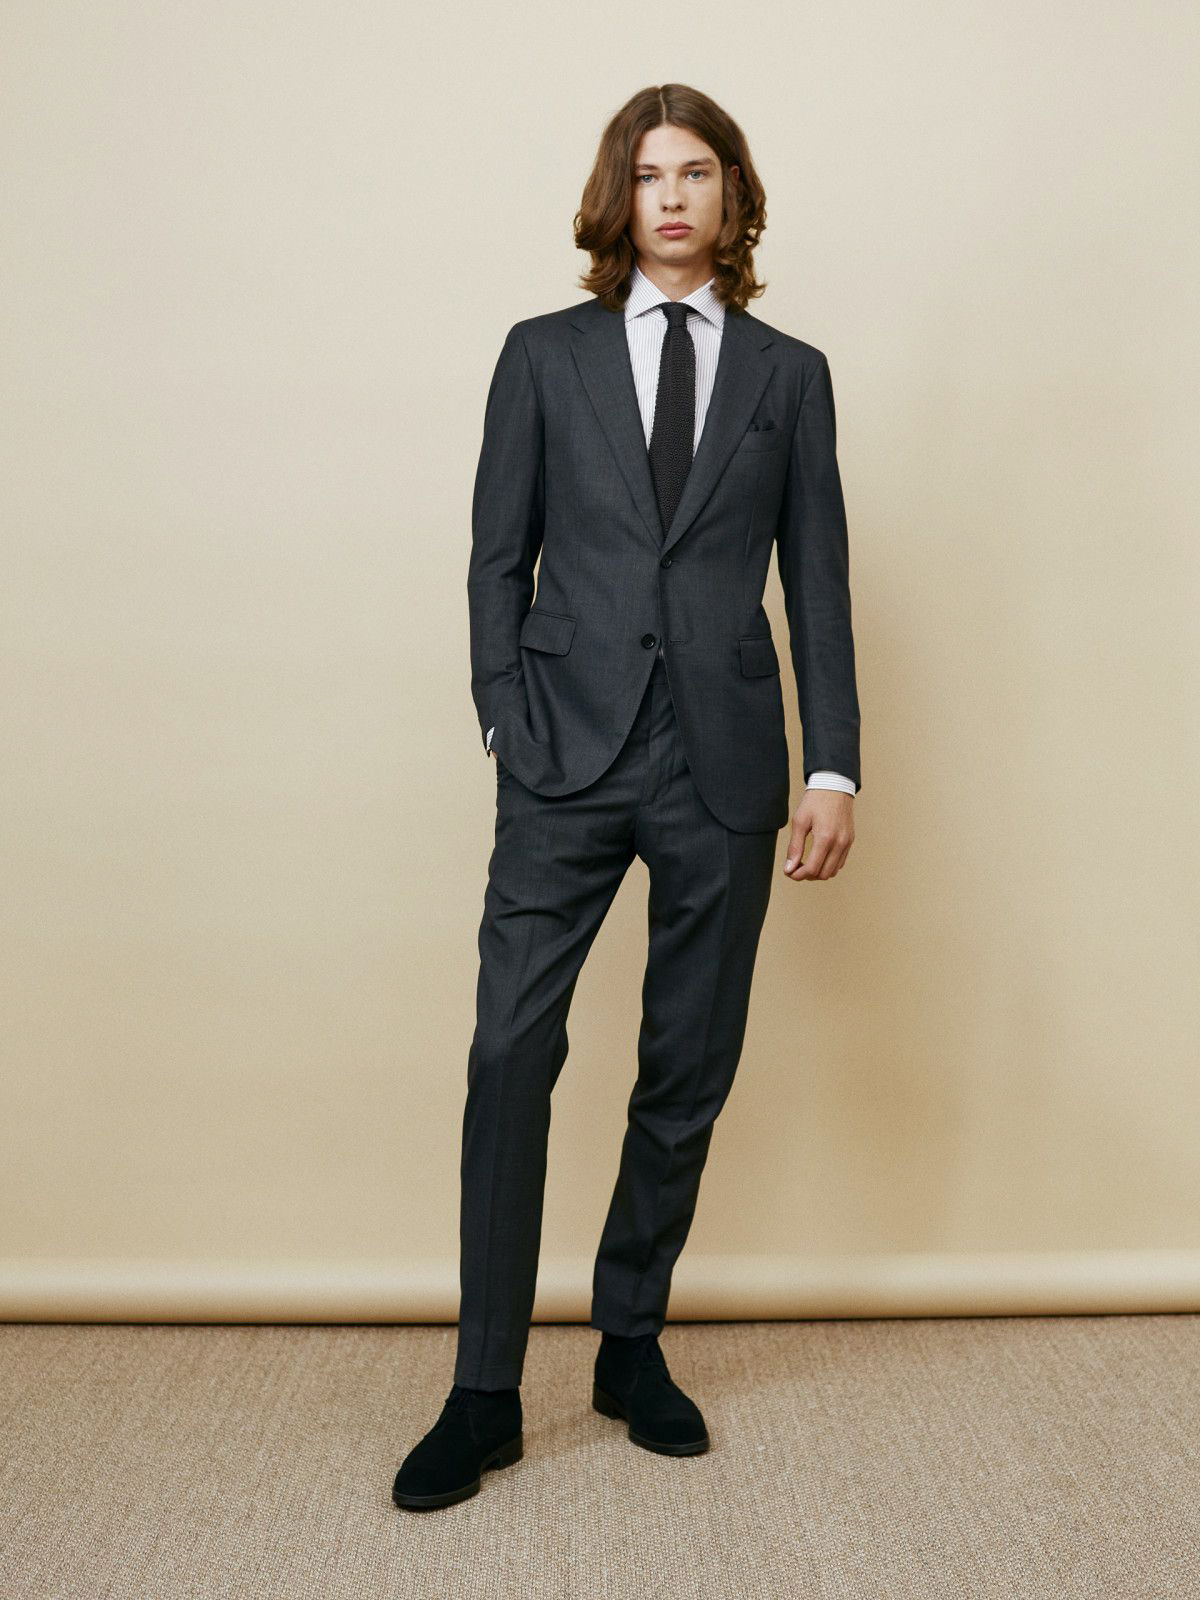 charcoal suit with white dress shirt and black suede chukka boots